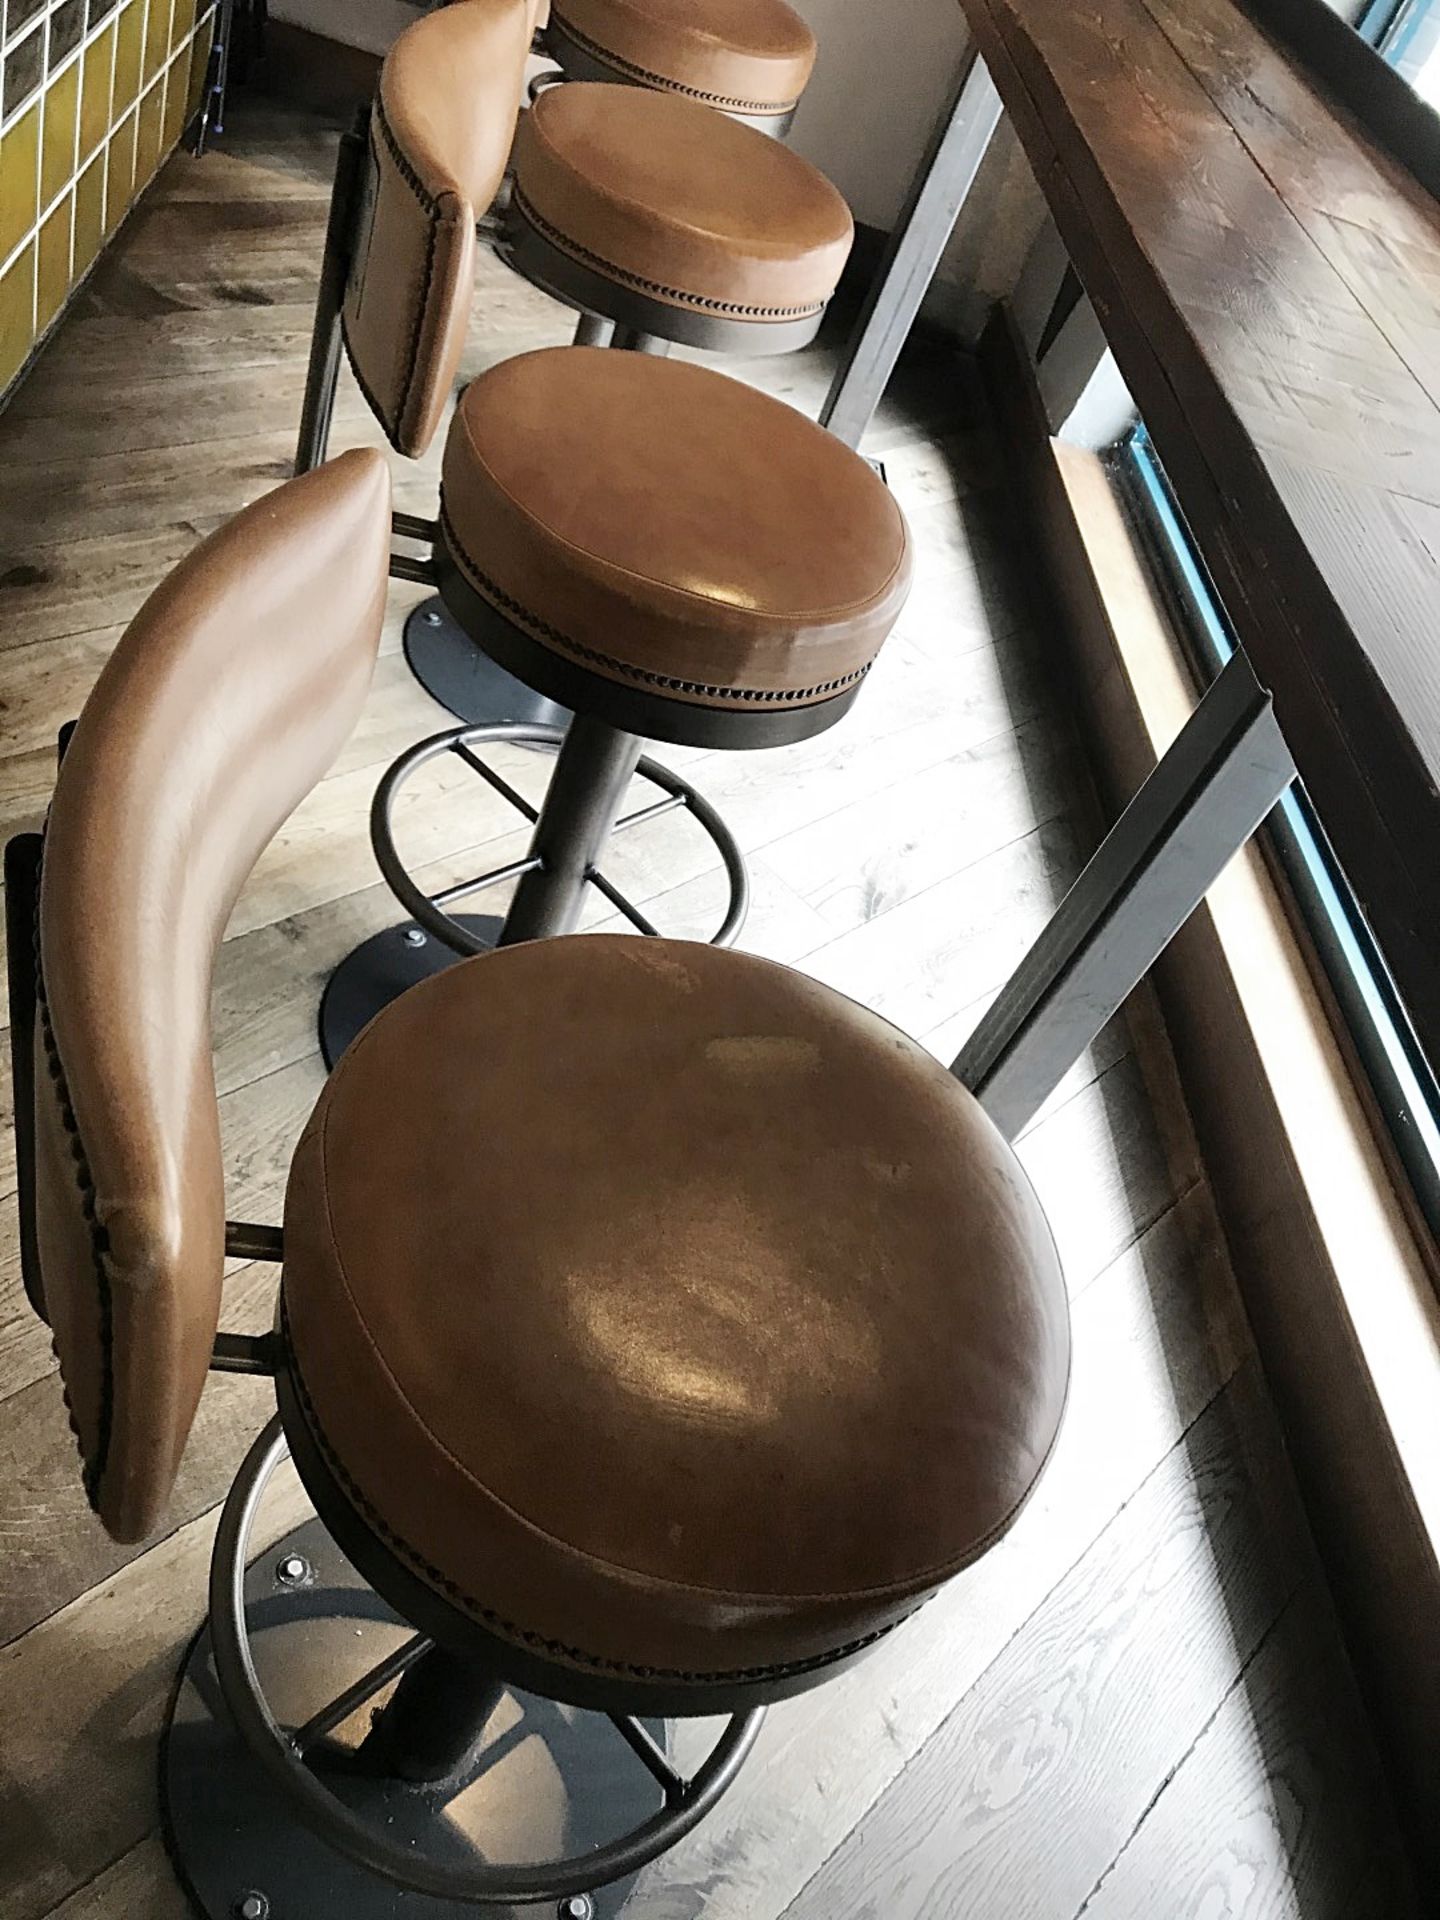 7 x Tan Leather Bar Stools With Backrests, Studded Detail and Footrests - H77/100 x W41 cms - - Image 3 of 5